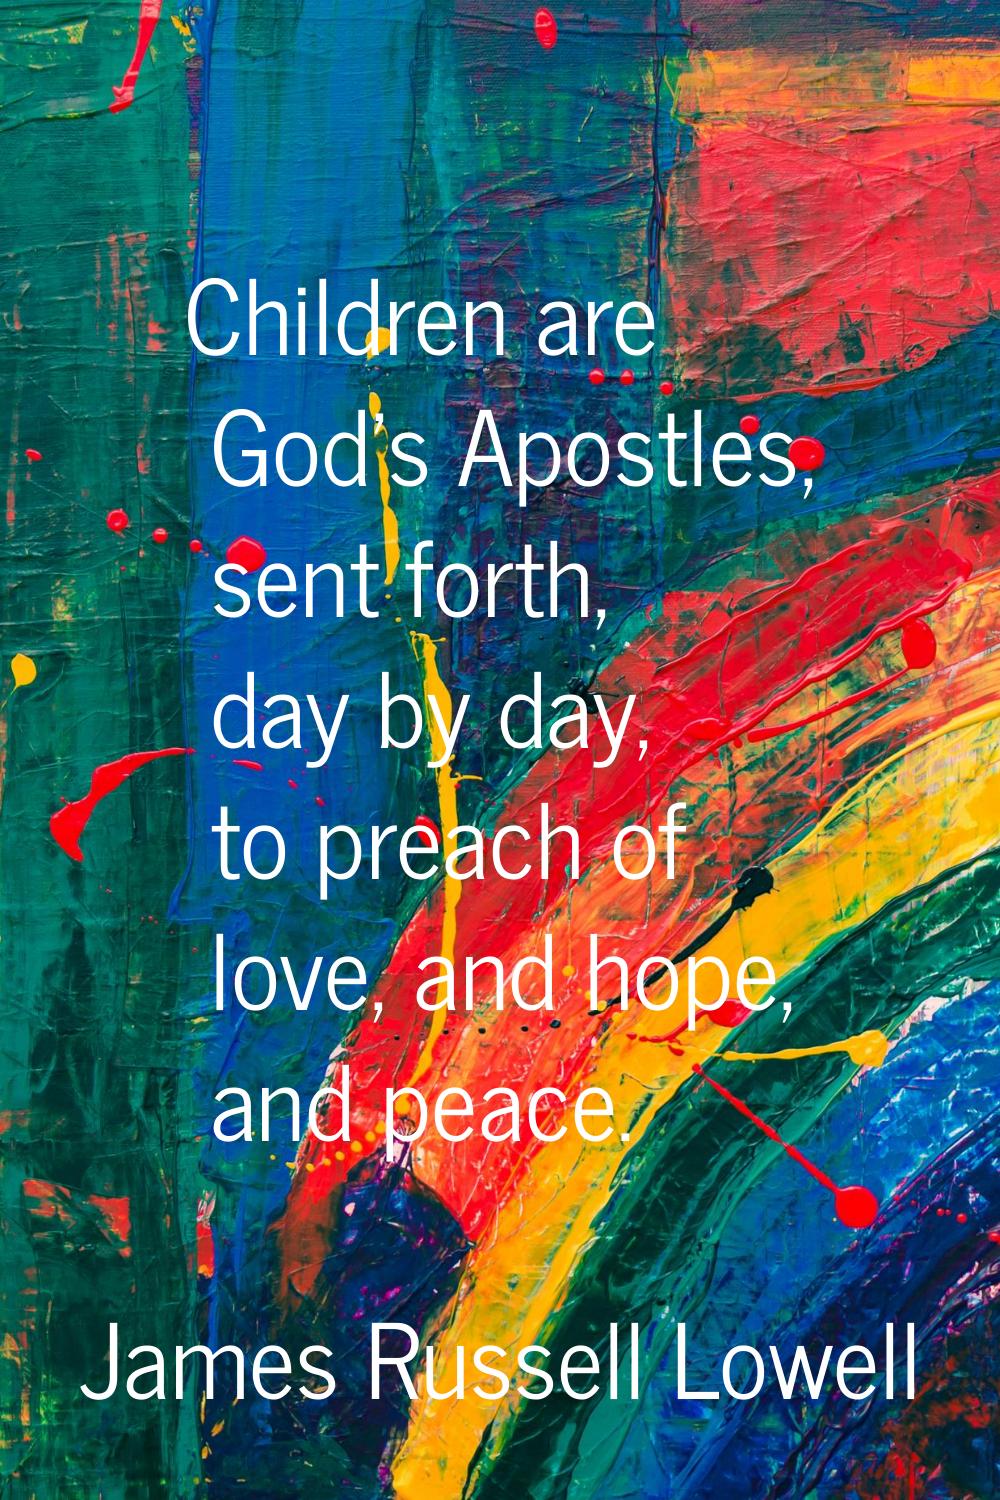 Children are God's Apostles, sent forth, day by day, to preach of love, and hope, and peace.